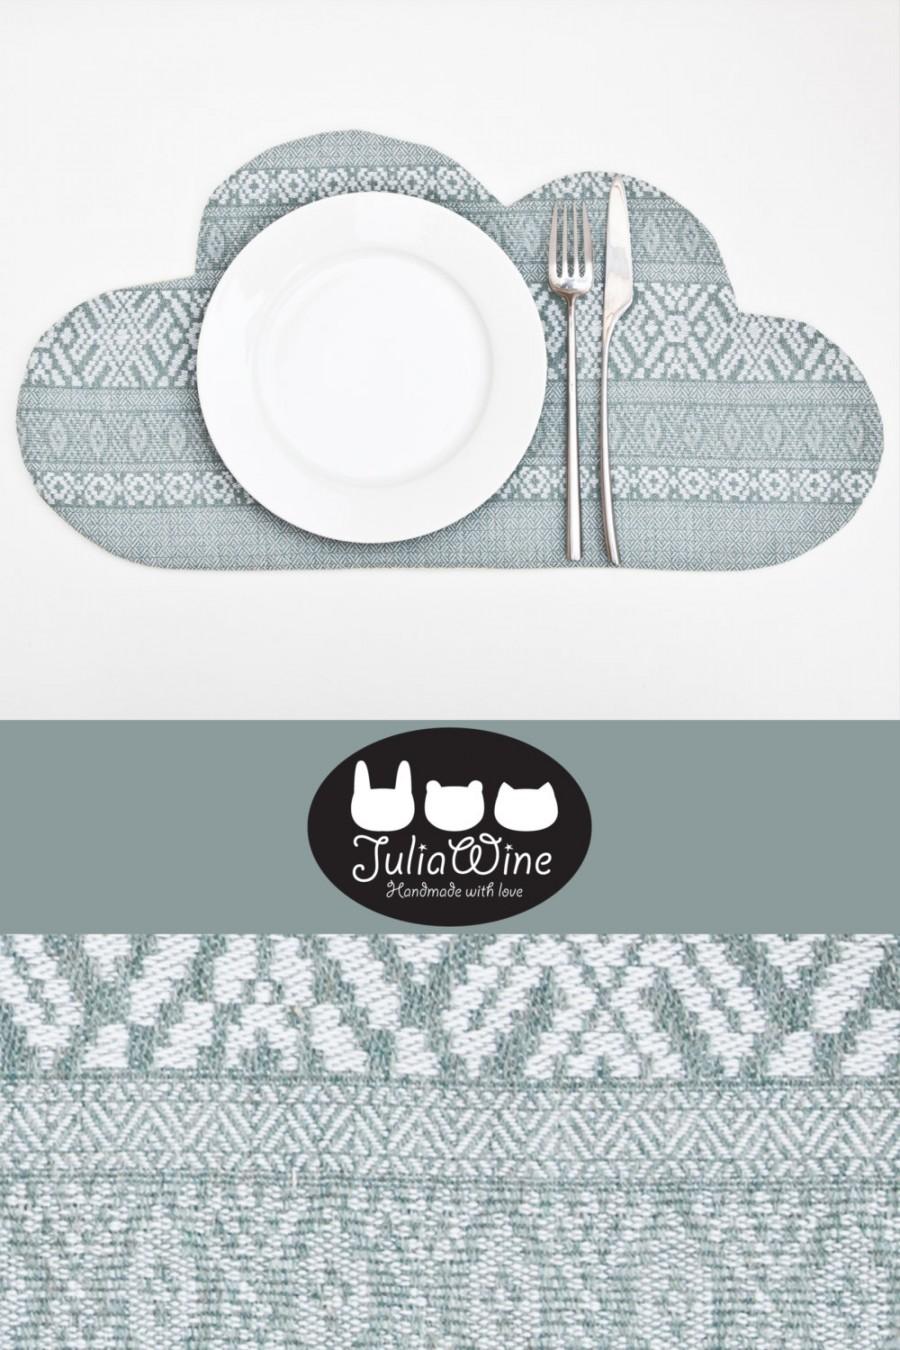 Wedding - Tribal Placemat, Cloud Linen Placemat, kitchen decor, Table Linens, Housewarming Gifts, Table Placemats, Mother Day Gift